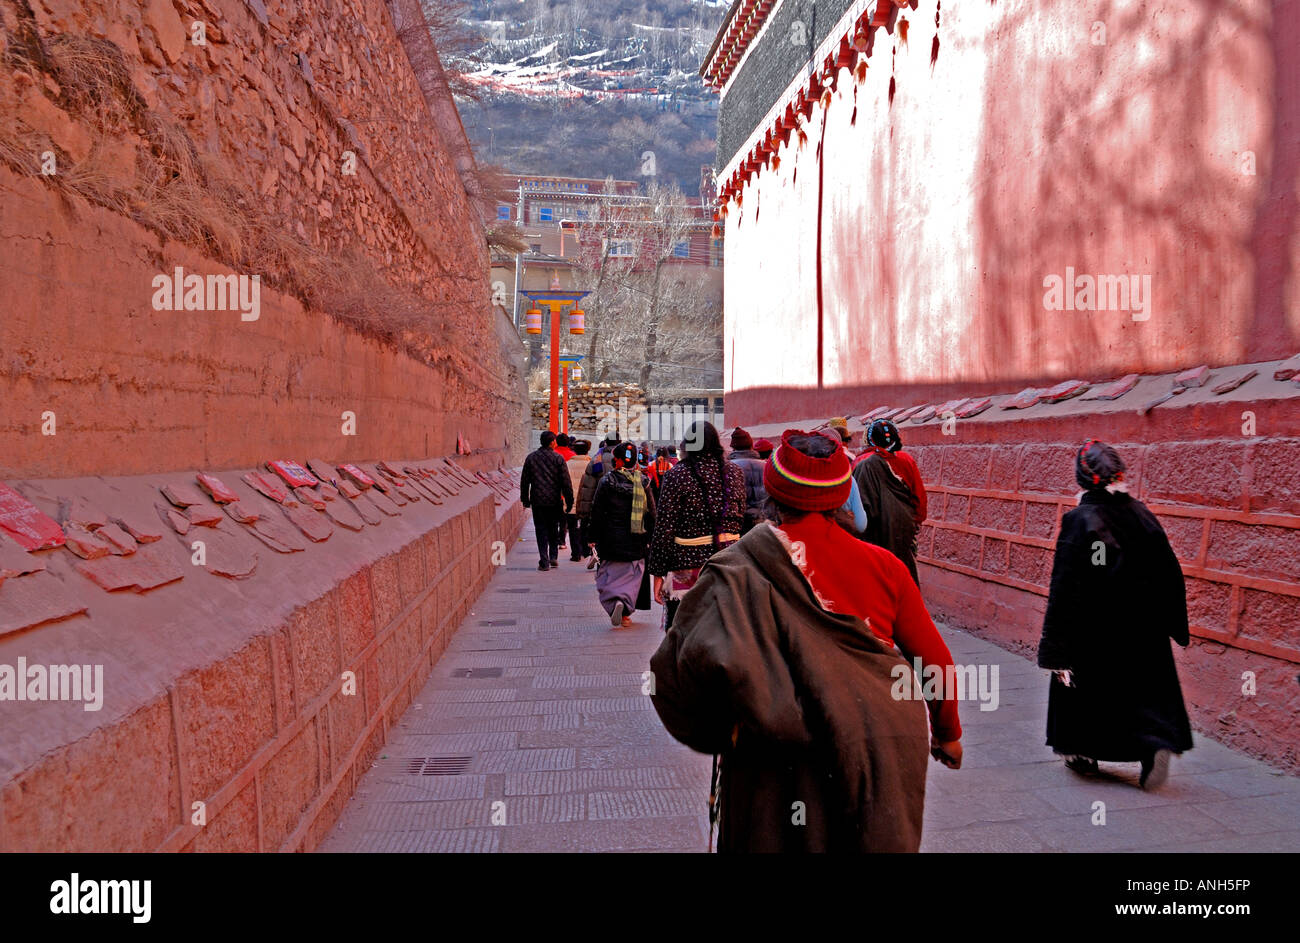 a tibetan people in the lamasery praying family safety and good luck . Stock Photo